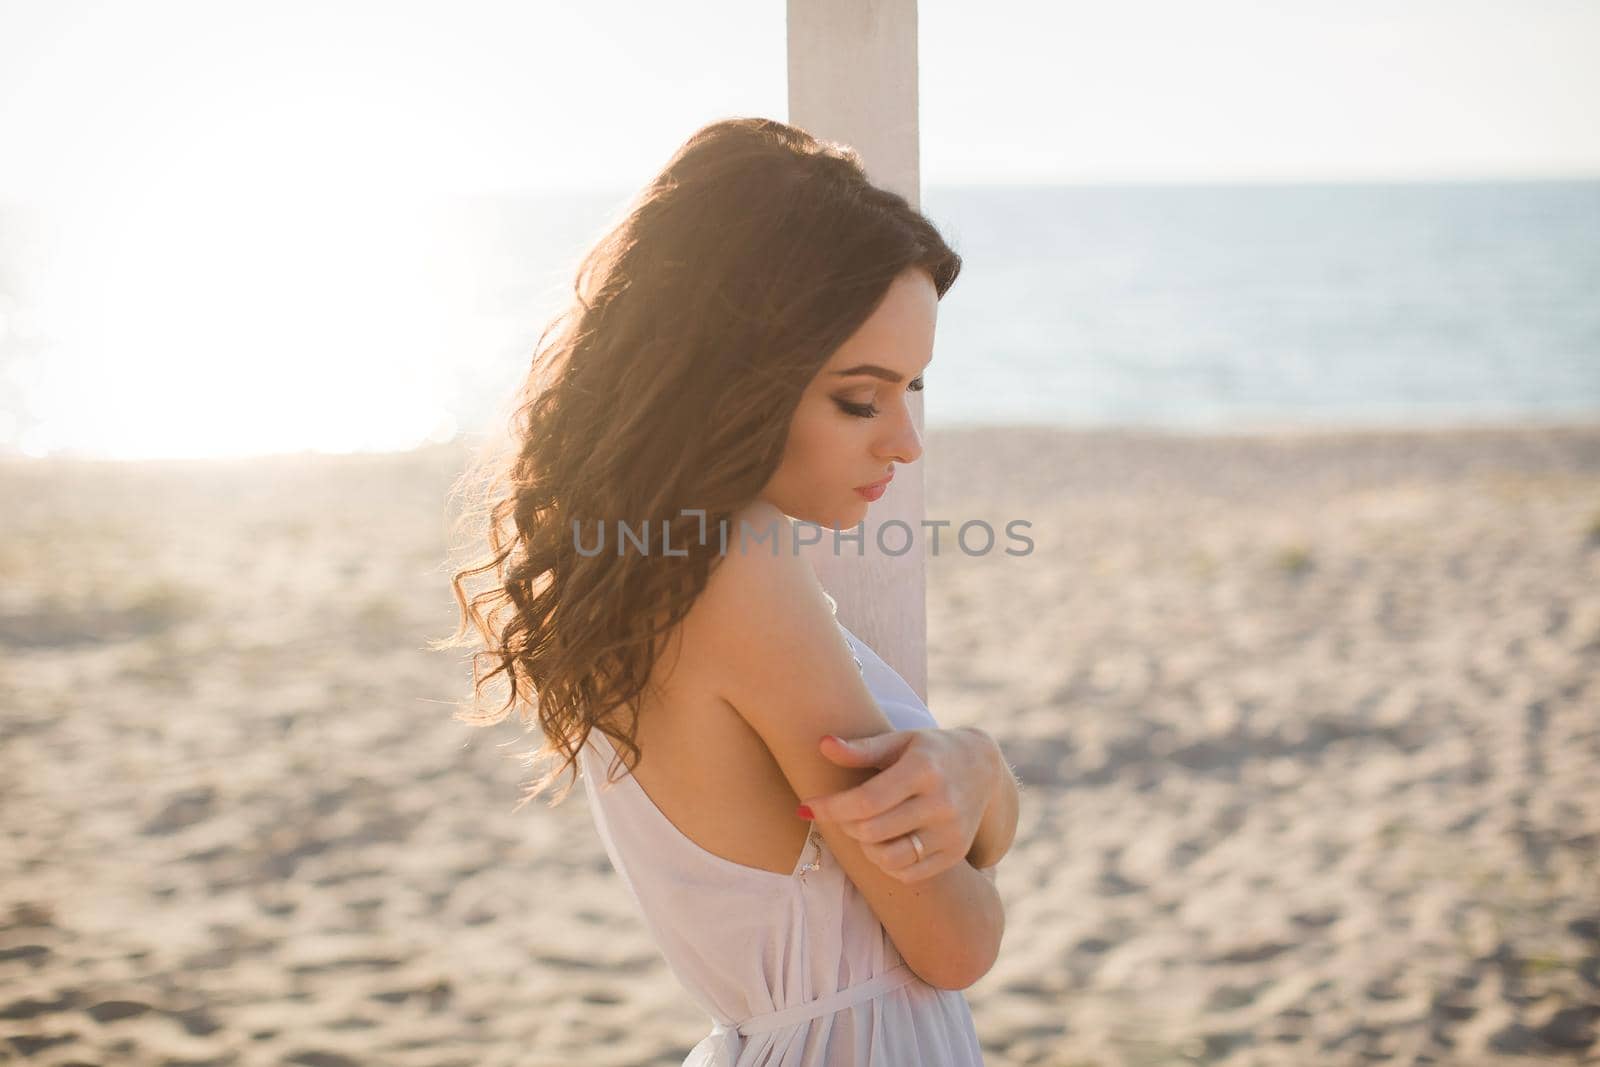 Beautiful girl on the beach in a white dress.